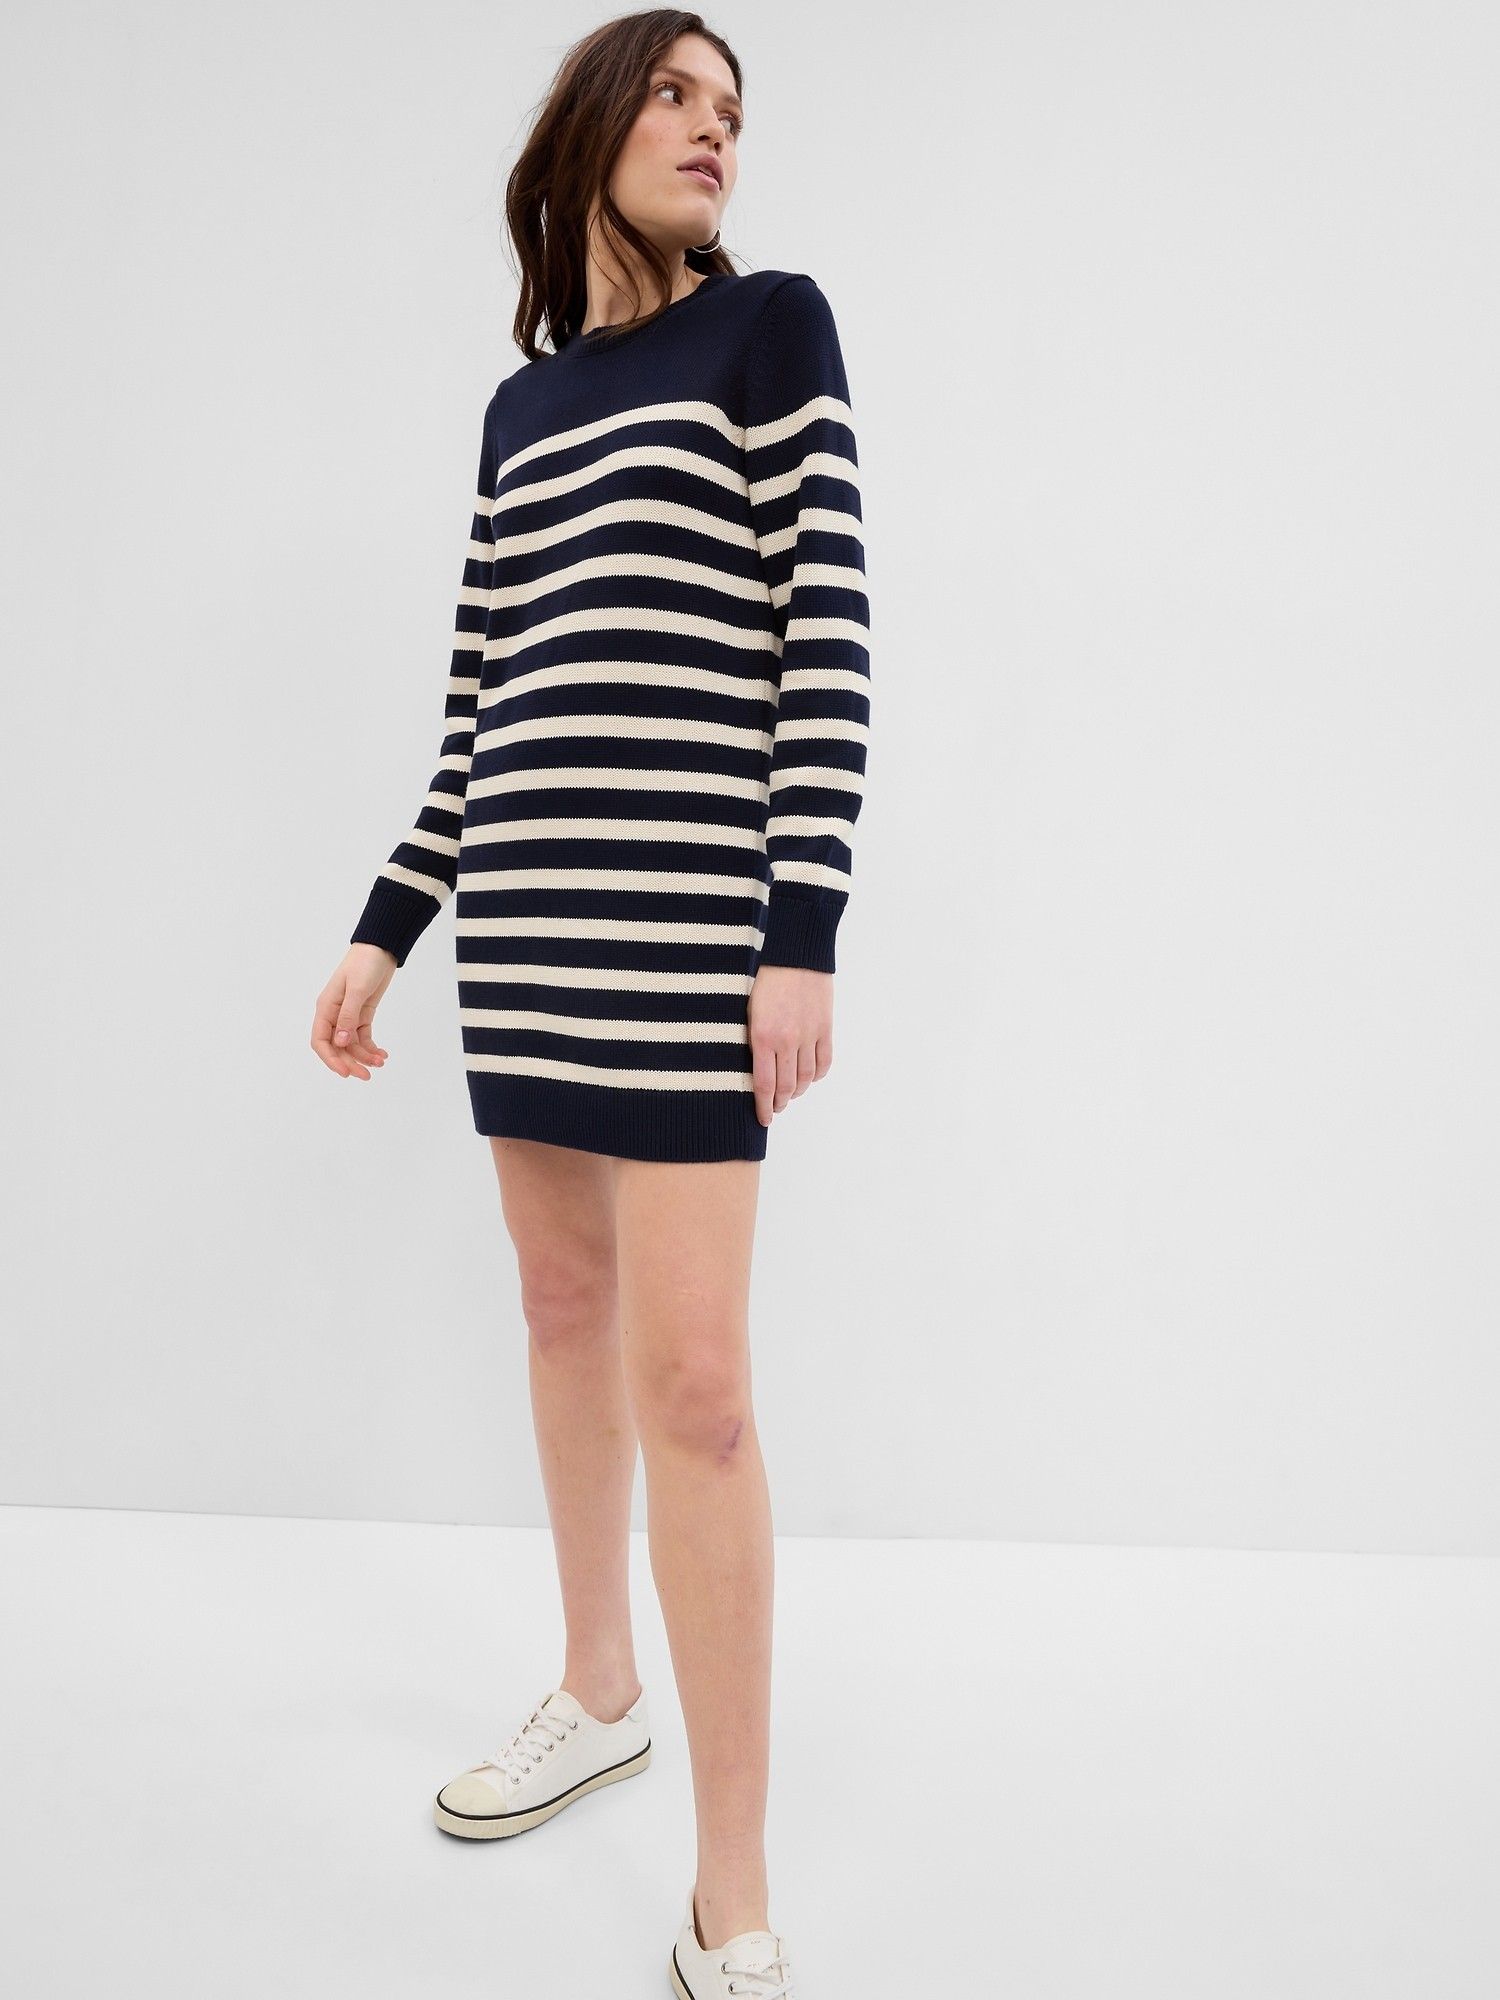 Sweater Dresses We're Loving For Fall + Winter - Brit + Co